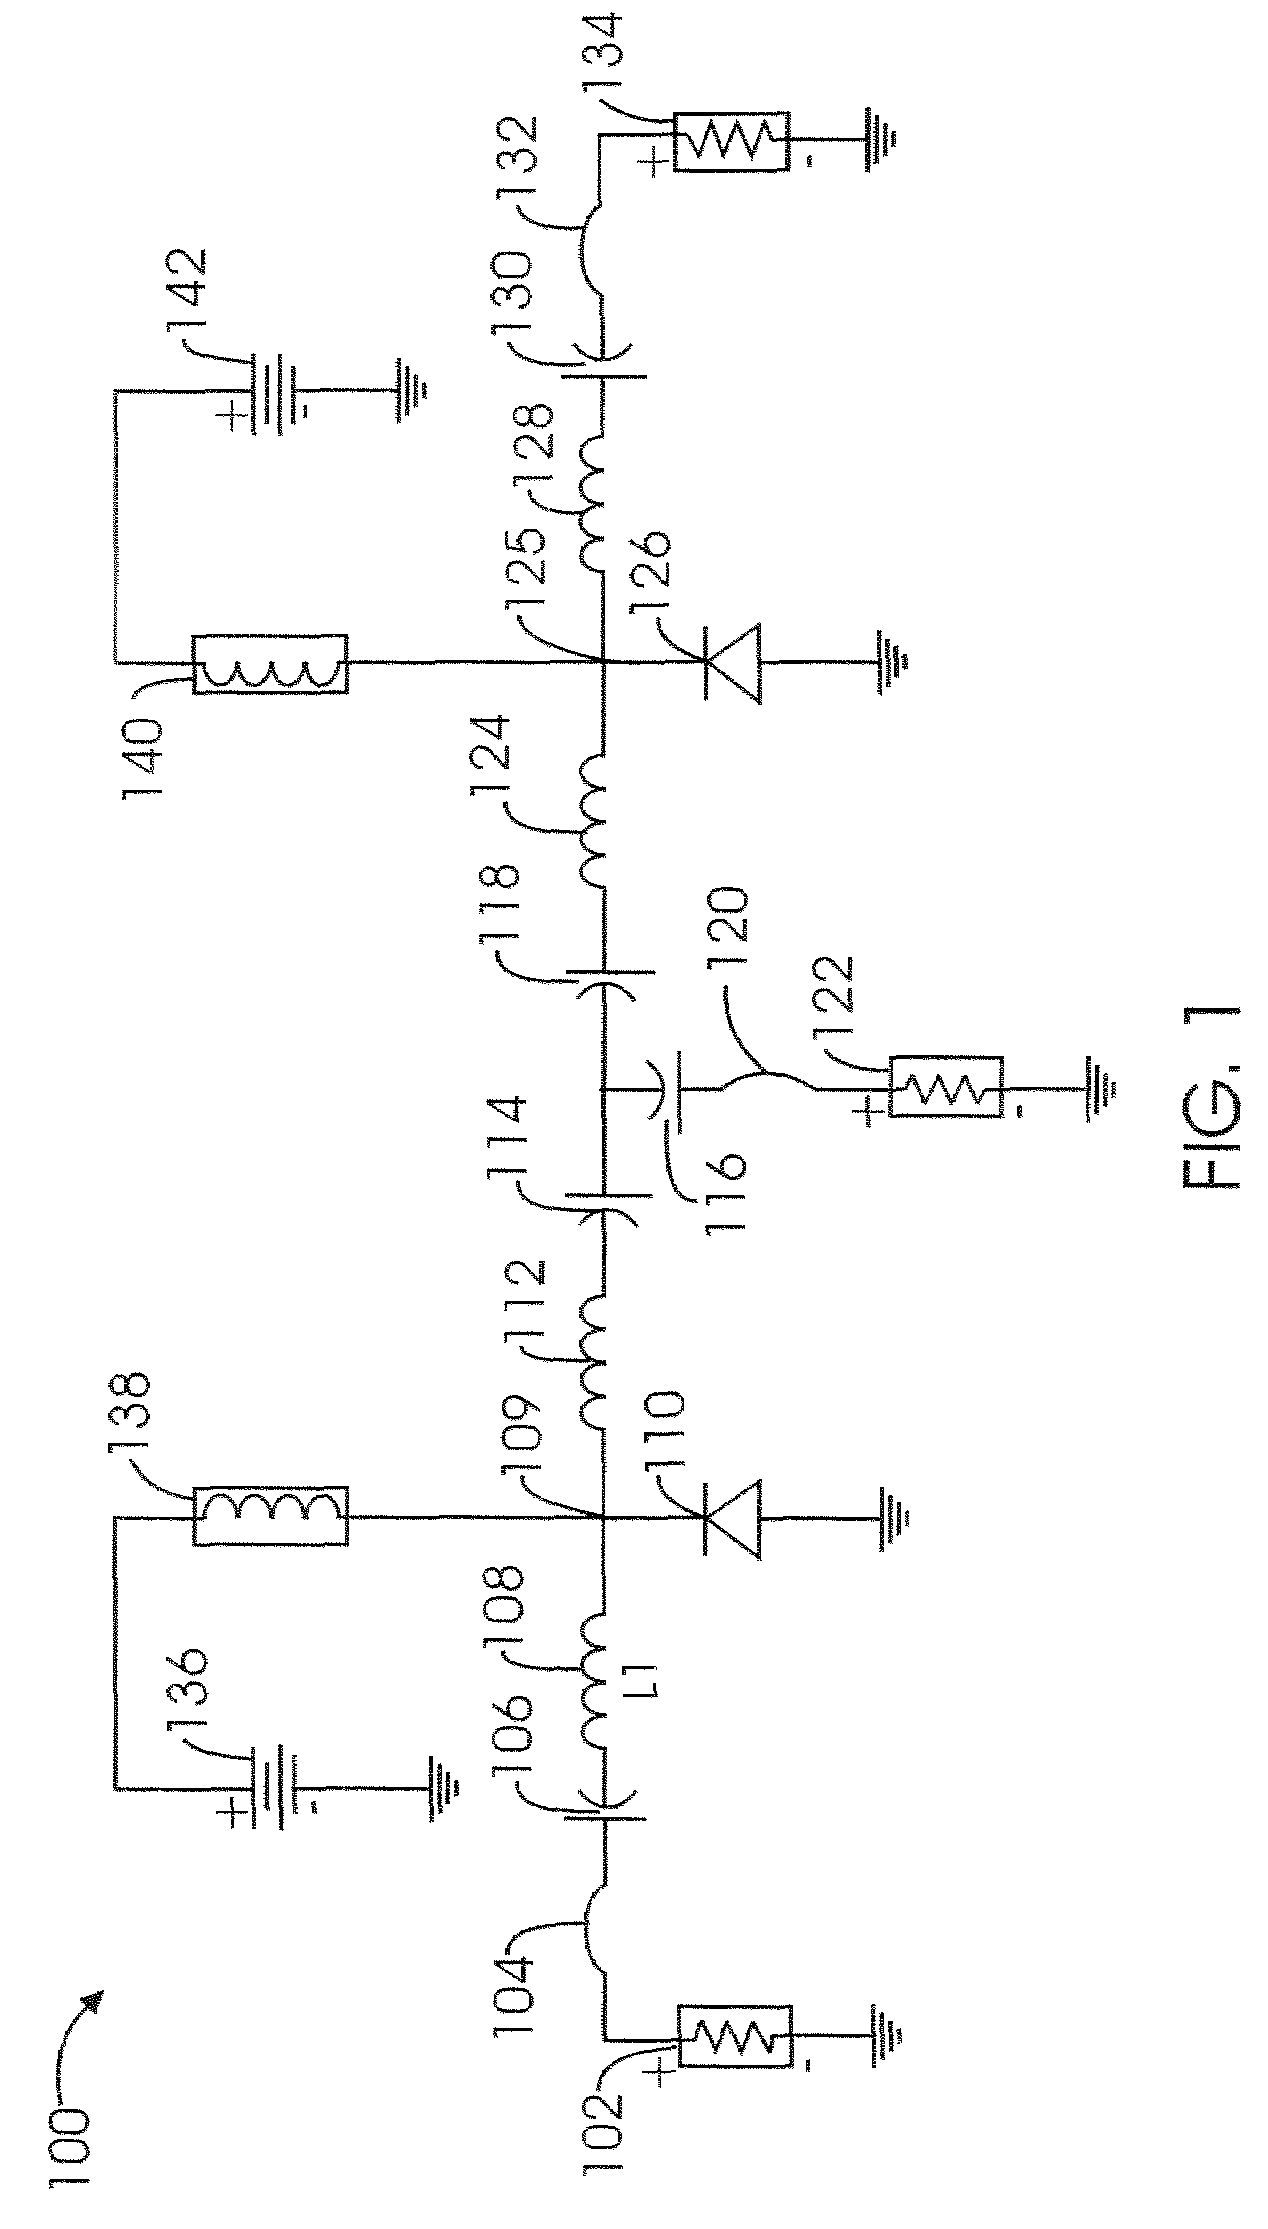 Method to improve characteristics of pin diode switches, attenuators, and limiters by control of nodal signal voltage amplitude